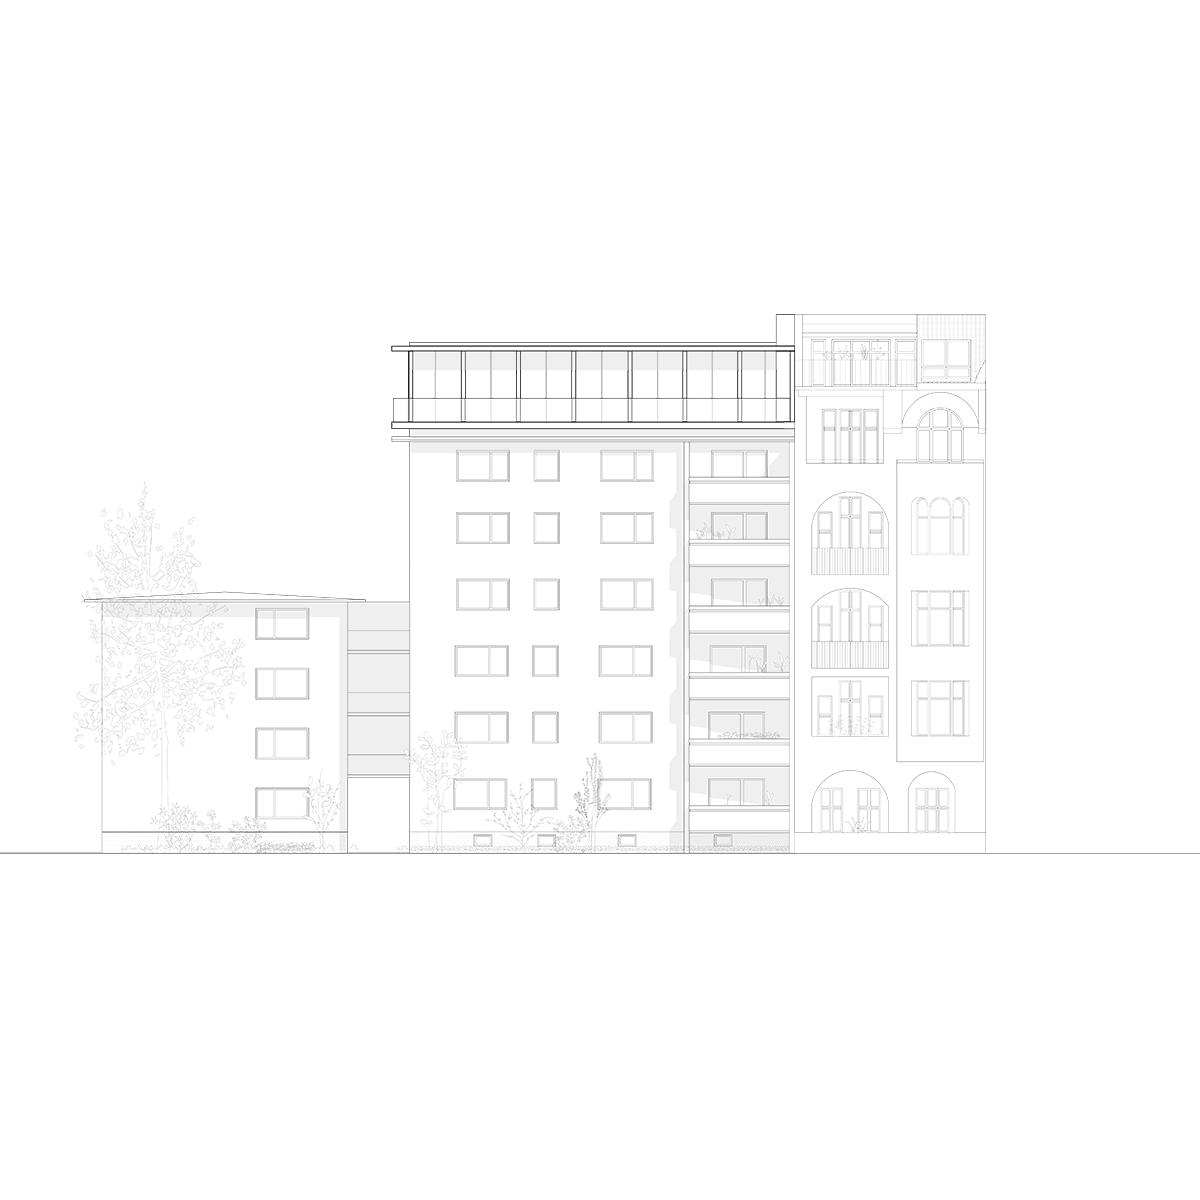 FAKT – Office for Architecture